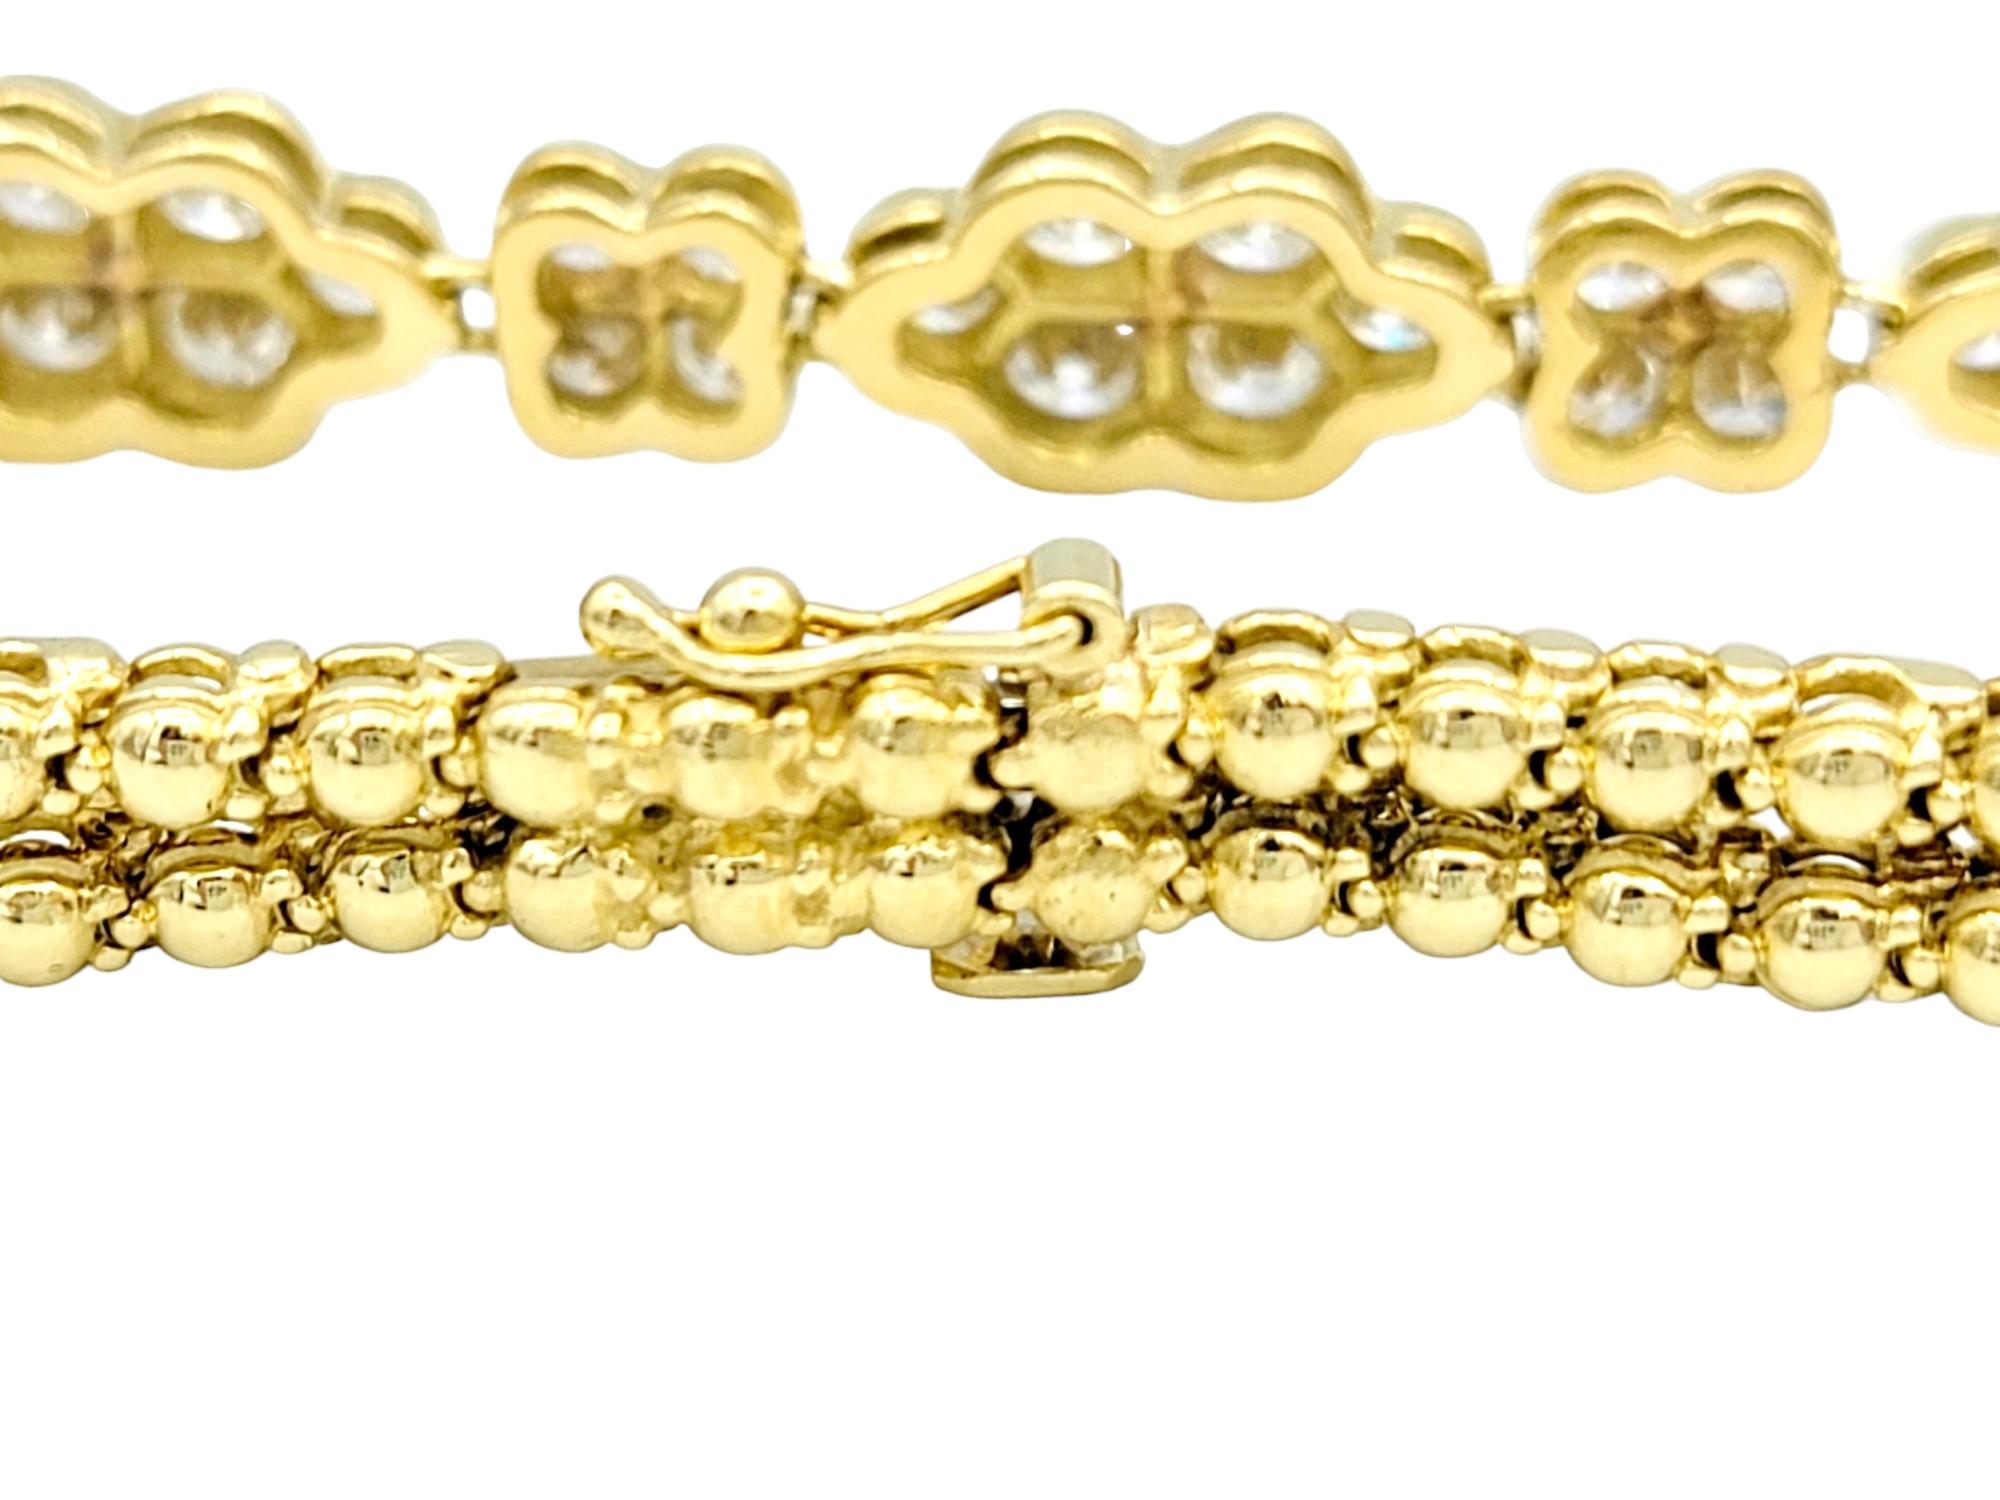 3.36 Carat Diamond Floral Double Row Bead Link Bracelet in 18 Karat Yellow Gold In Good Condition For Sale In Scottsdale, AZ